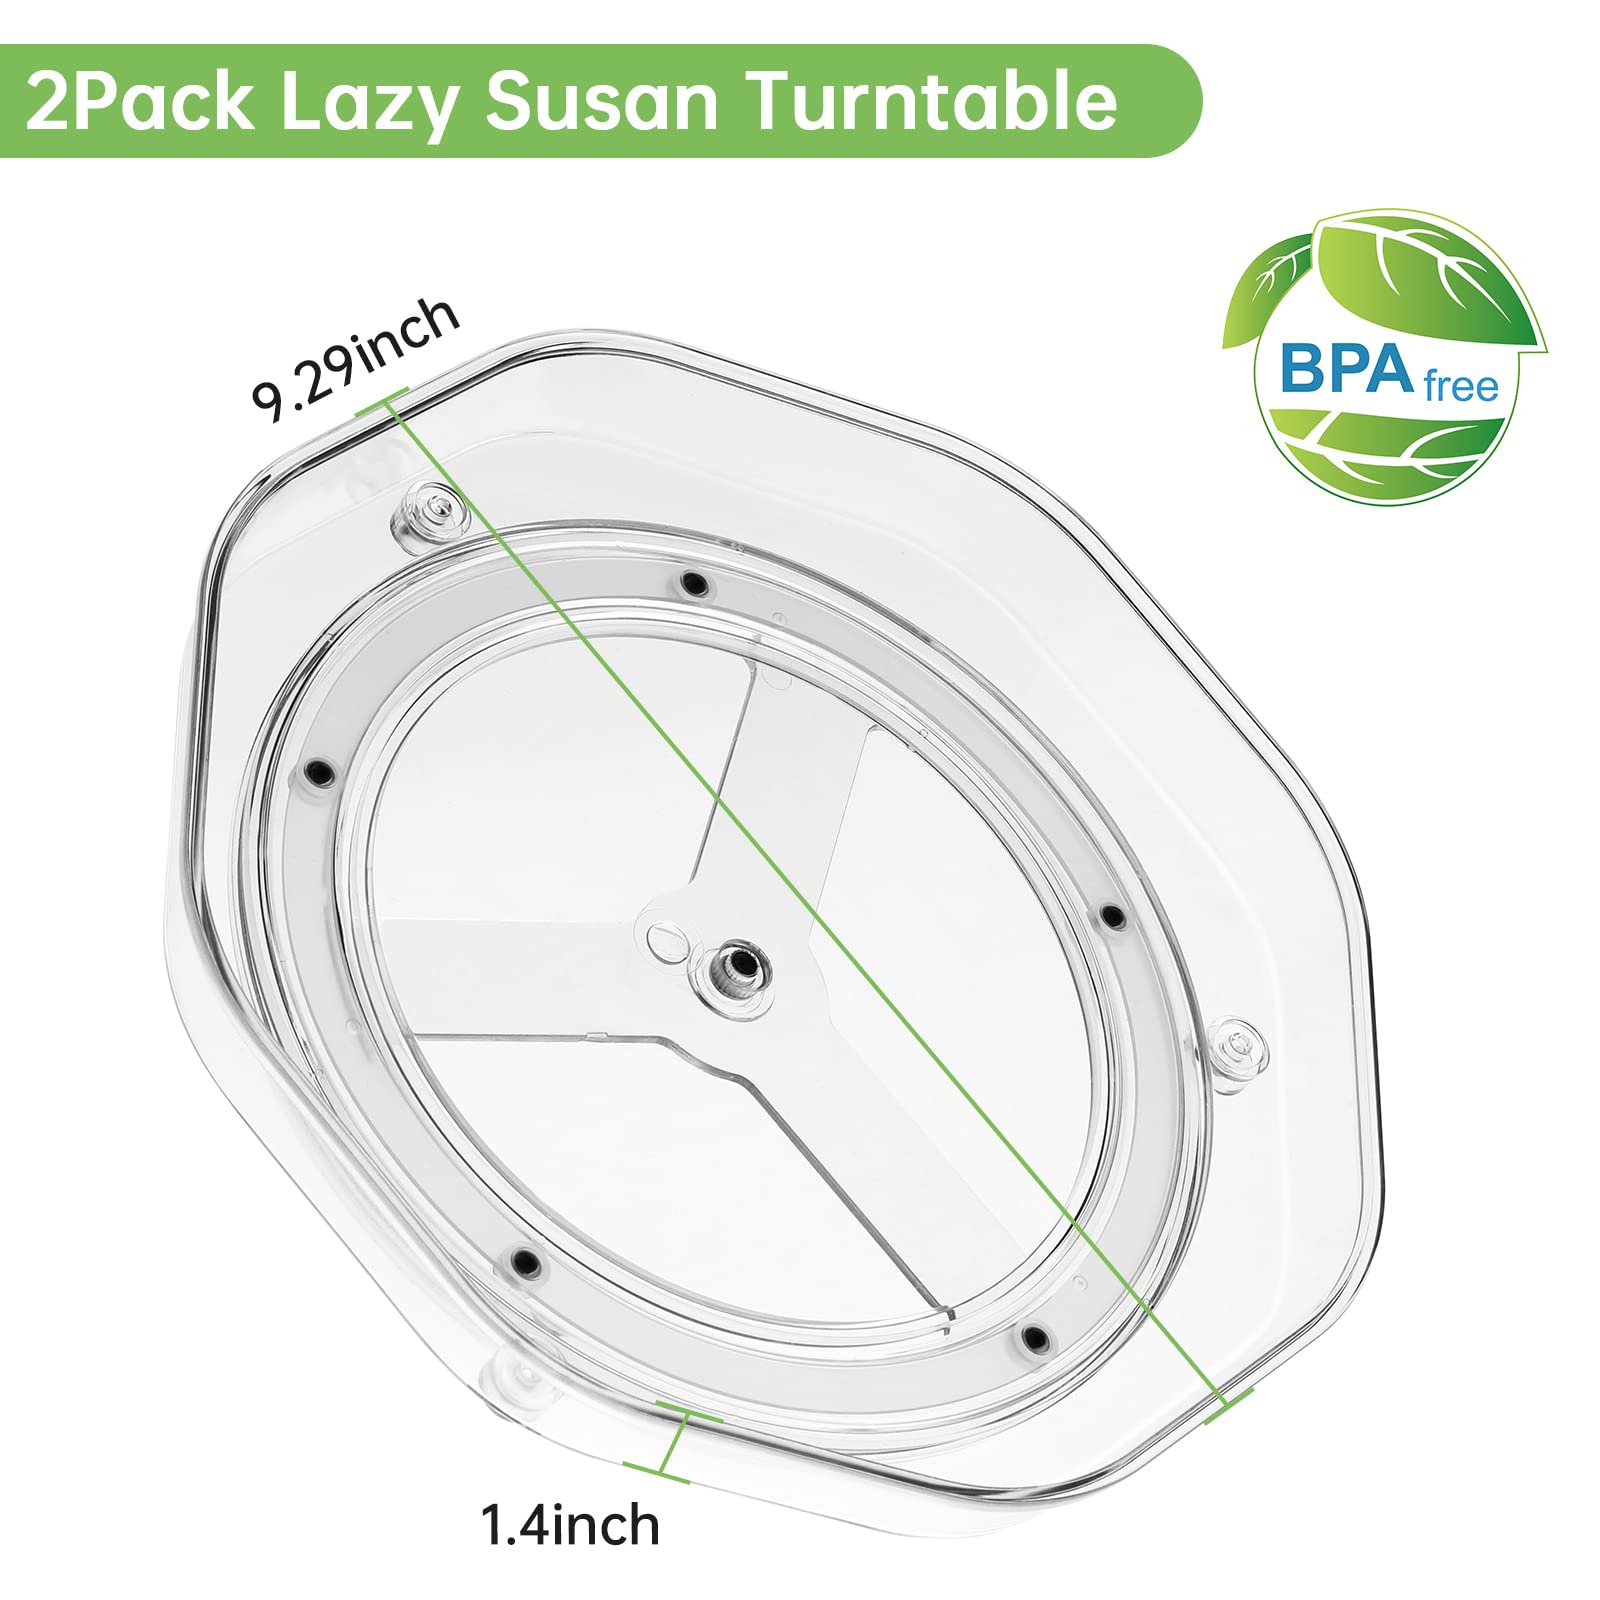 Clear Lazy Susan Organizer, BS ONE 2 Pack 9 Inches Turntable Lazy Susan Spice Rack for Cabinets Kitchen, Countertop, Bathroom, Makeup, Pantry Organization and Storage